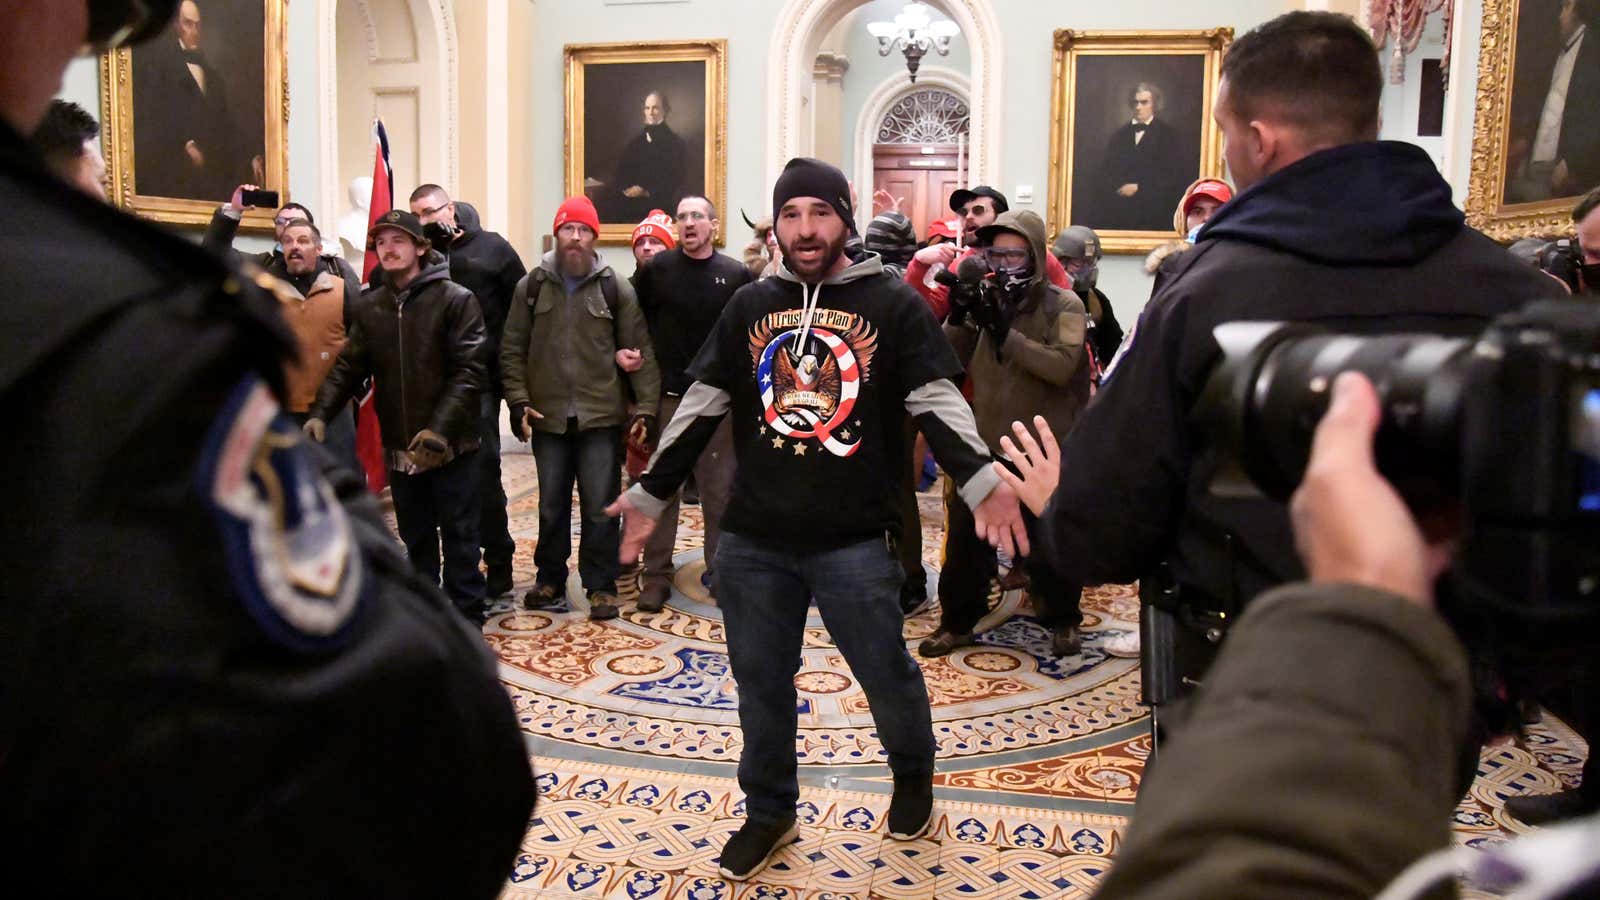 A supporter of president Donald Trump, wearing a QAnon shirt, confronts police in the US Capitol after breaching security defenses.